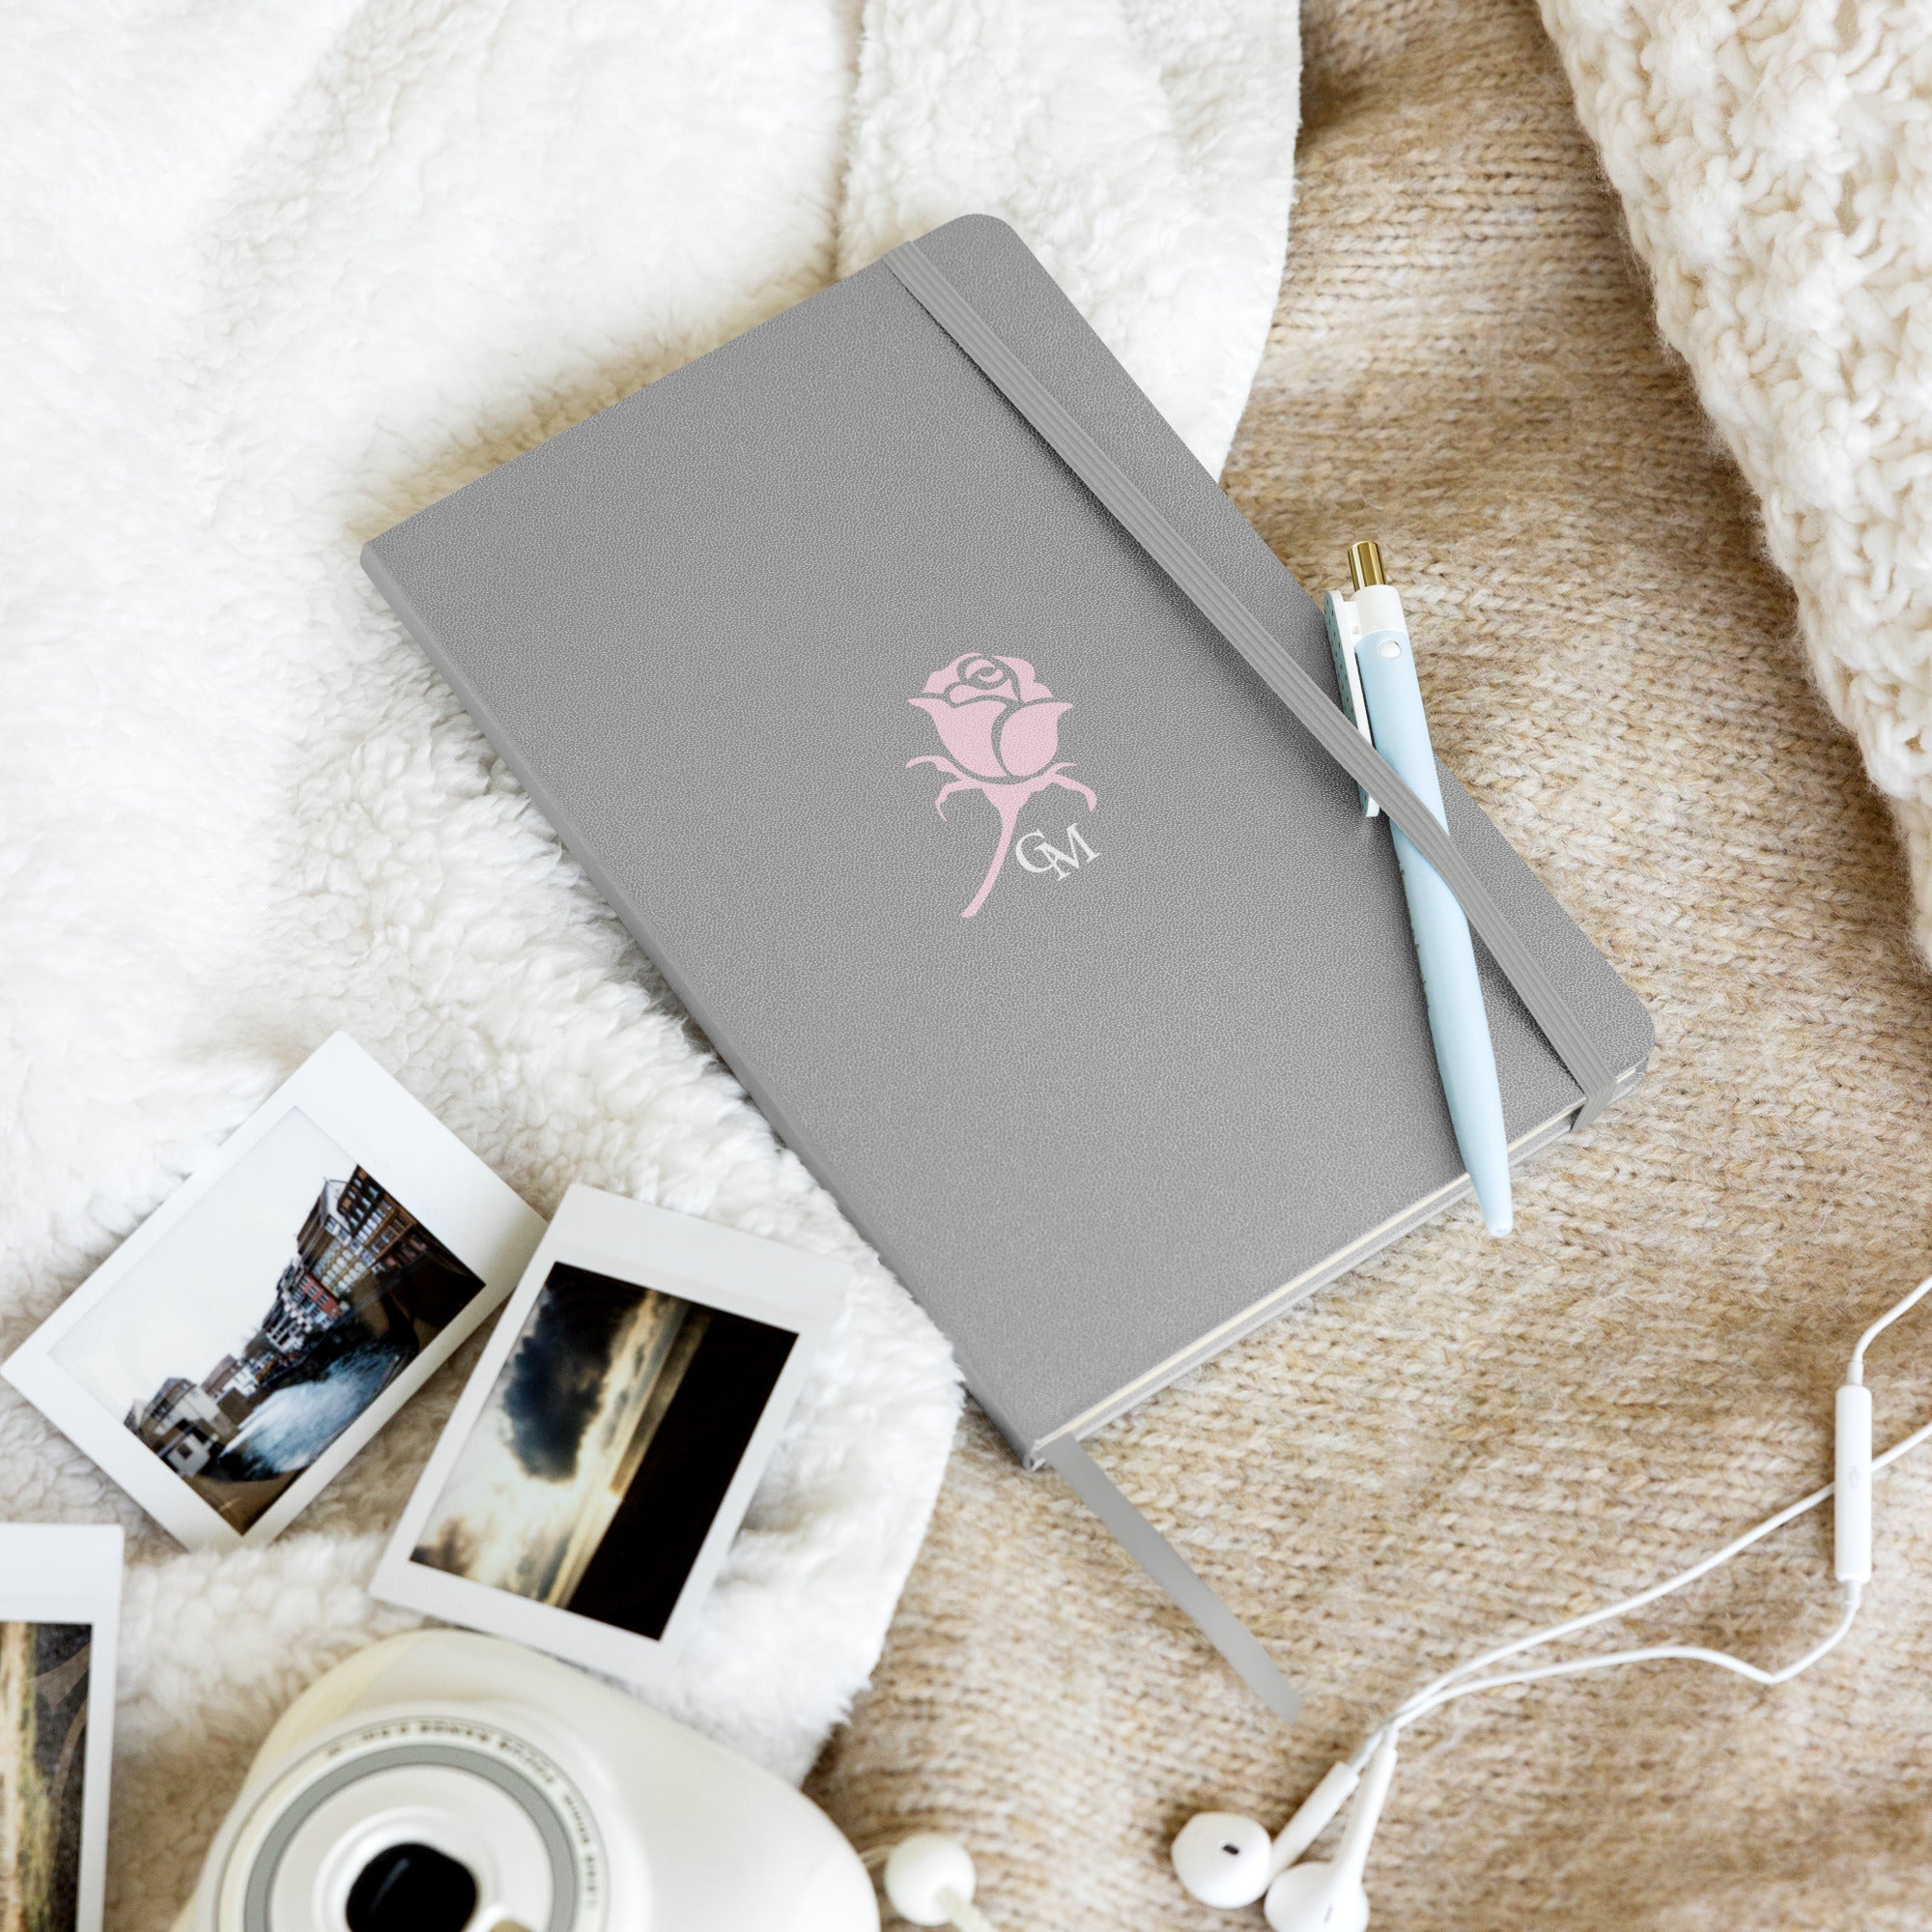 CM Pink Road Hardcover bound journal/notebook